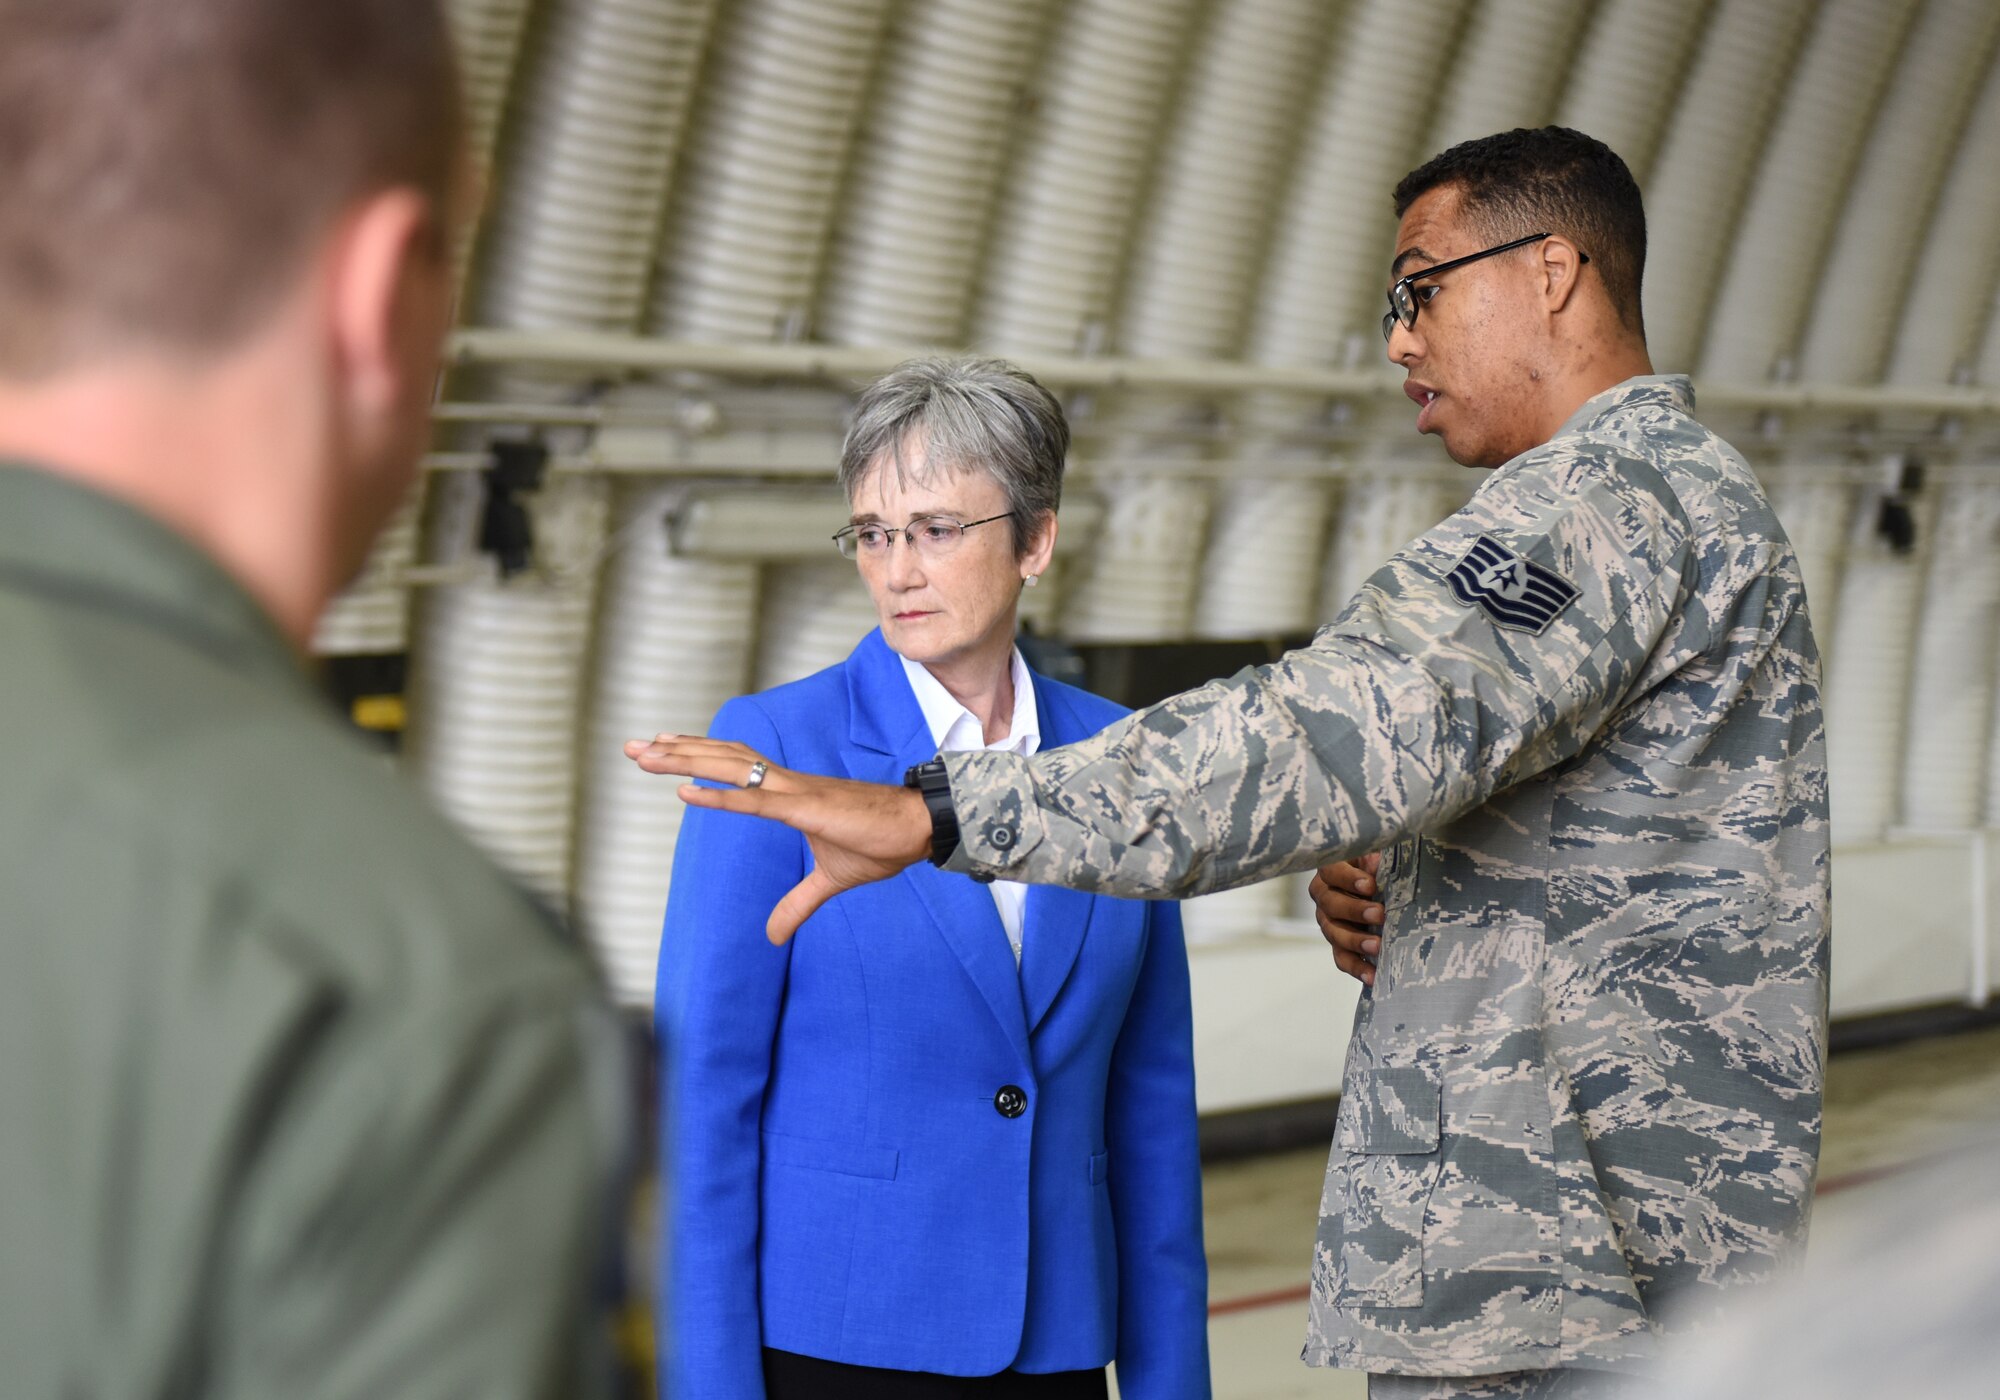 Secretary of the Air Force Heather Wilson receives a maintenance immersion brief from a 48th Maintenance Group Airman at Royal Air Force Lakenheath, England, July 11, 2018. During her visit, Wilson met with Airmen from across the base, learning what it takes to make the mission happen every day and how 48th Fighter Wing personnel are innovating by streamlining processes and reducing redundancies. (U.S. Air Force photo by Staff Sgt. Alex Fox Echols III)